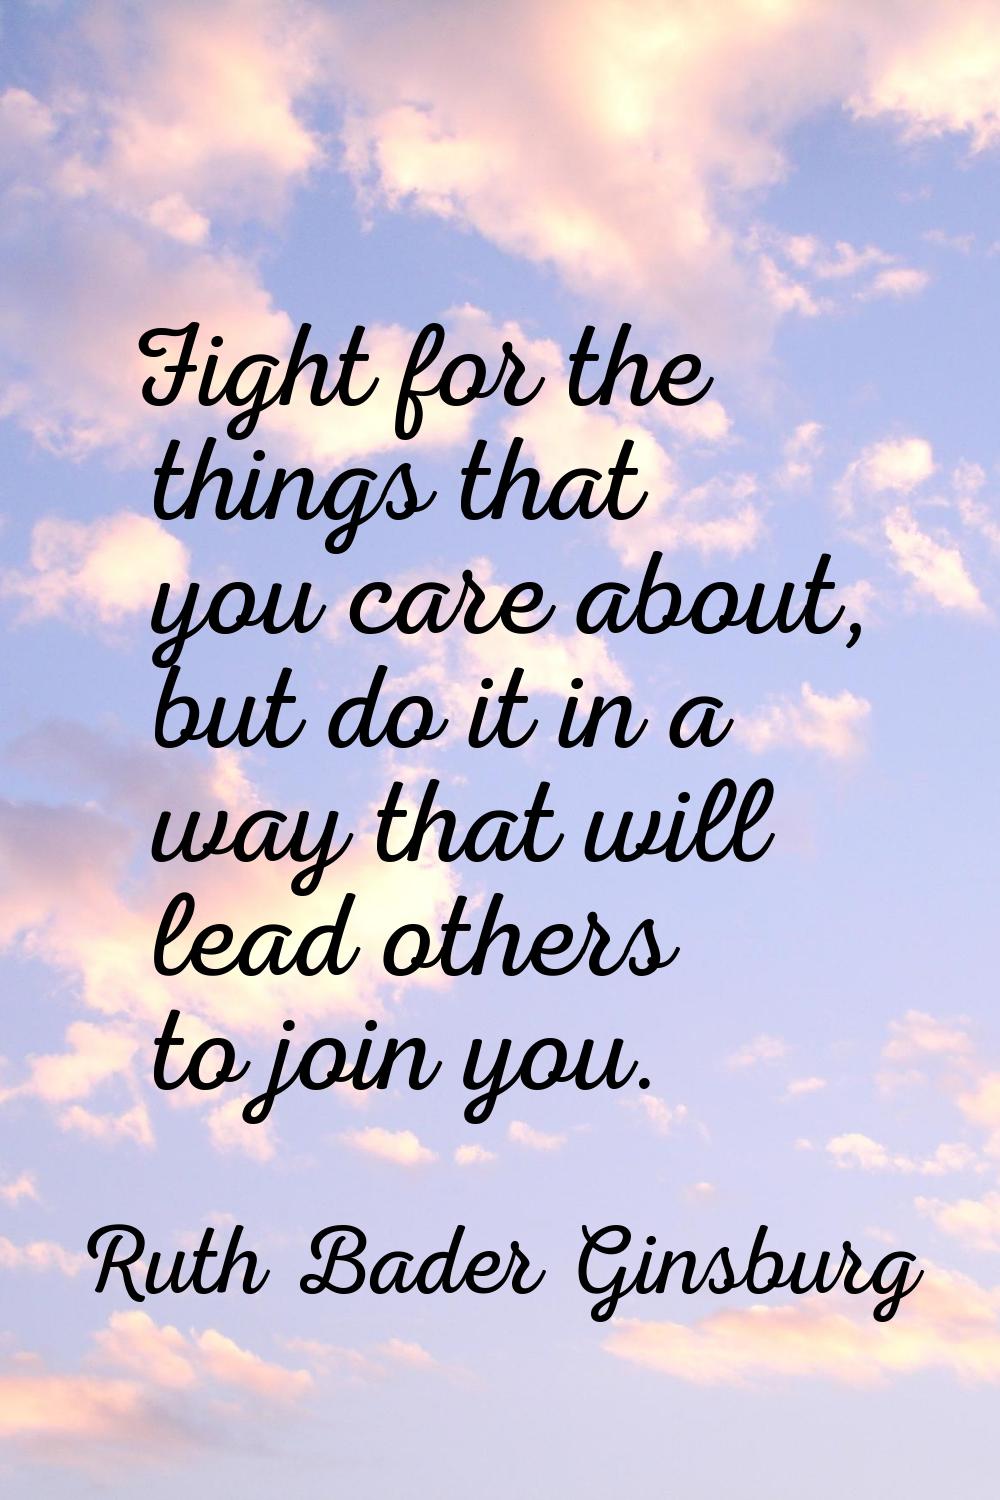 Fight for the things that you care about, but do it in a way that will lead others to join you.